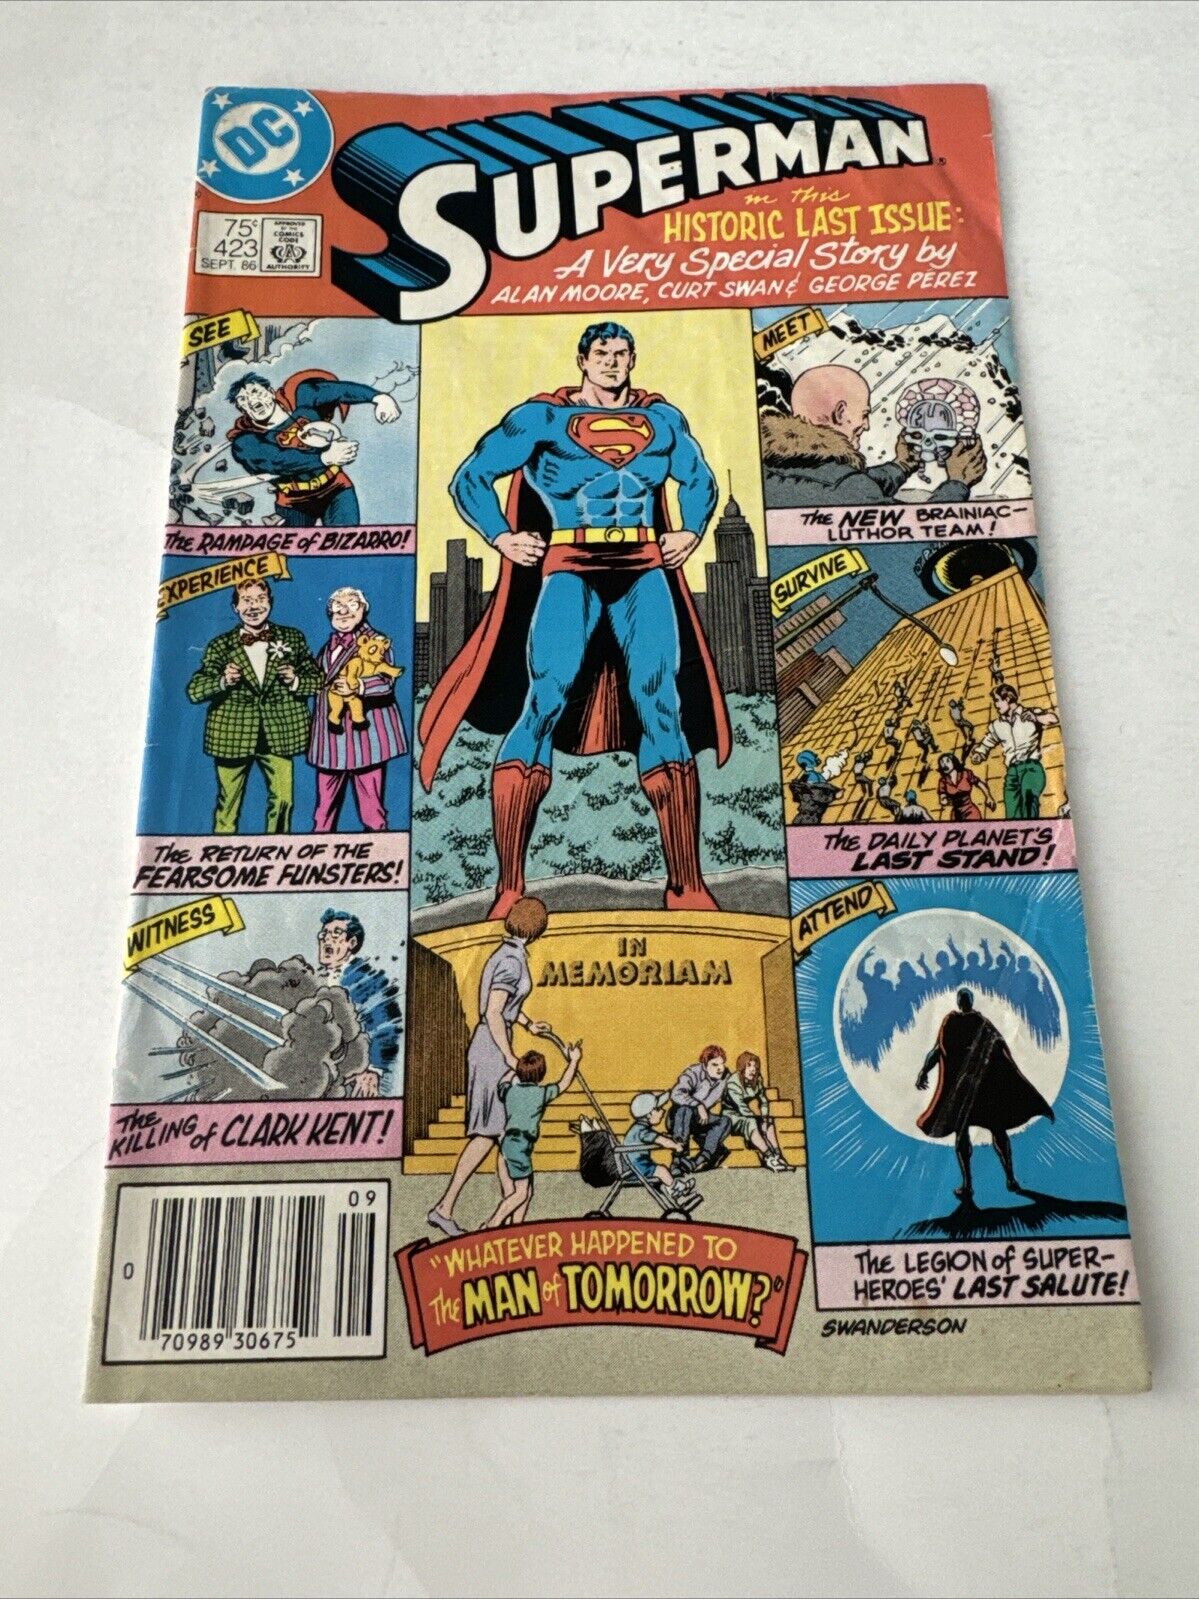 SUPERMAN #423 ALAN MOORE CURT SWAN LAST “SILVER AGE” ISSUE MAY 1986 CLASSIC